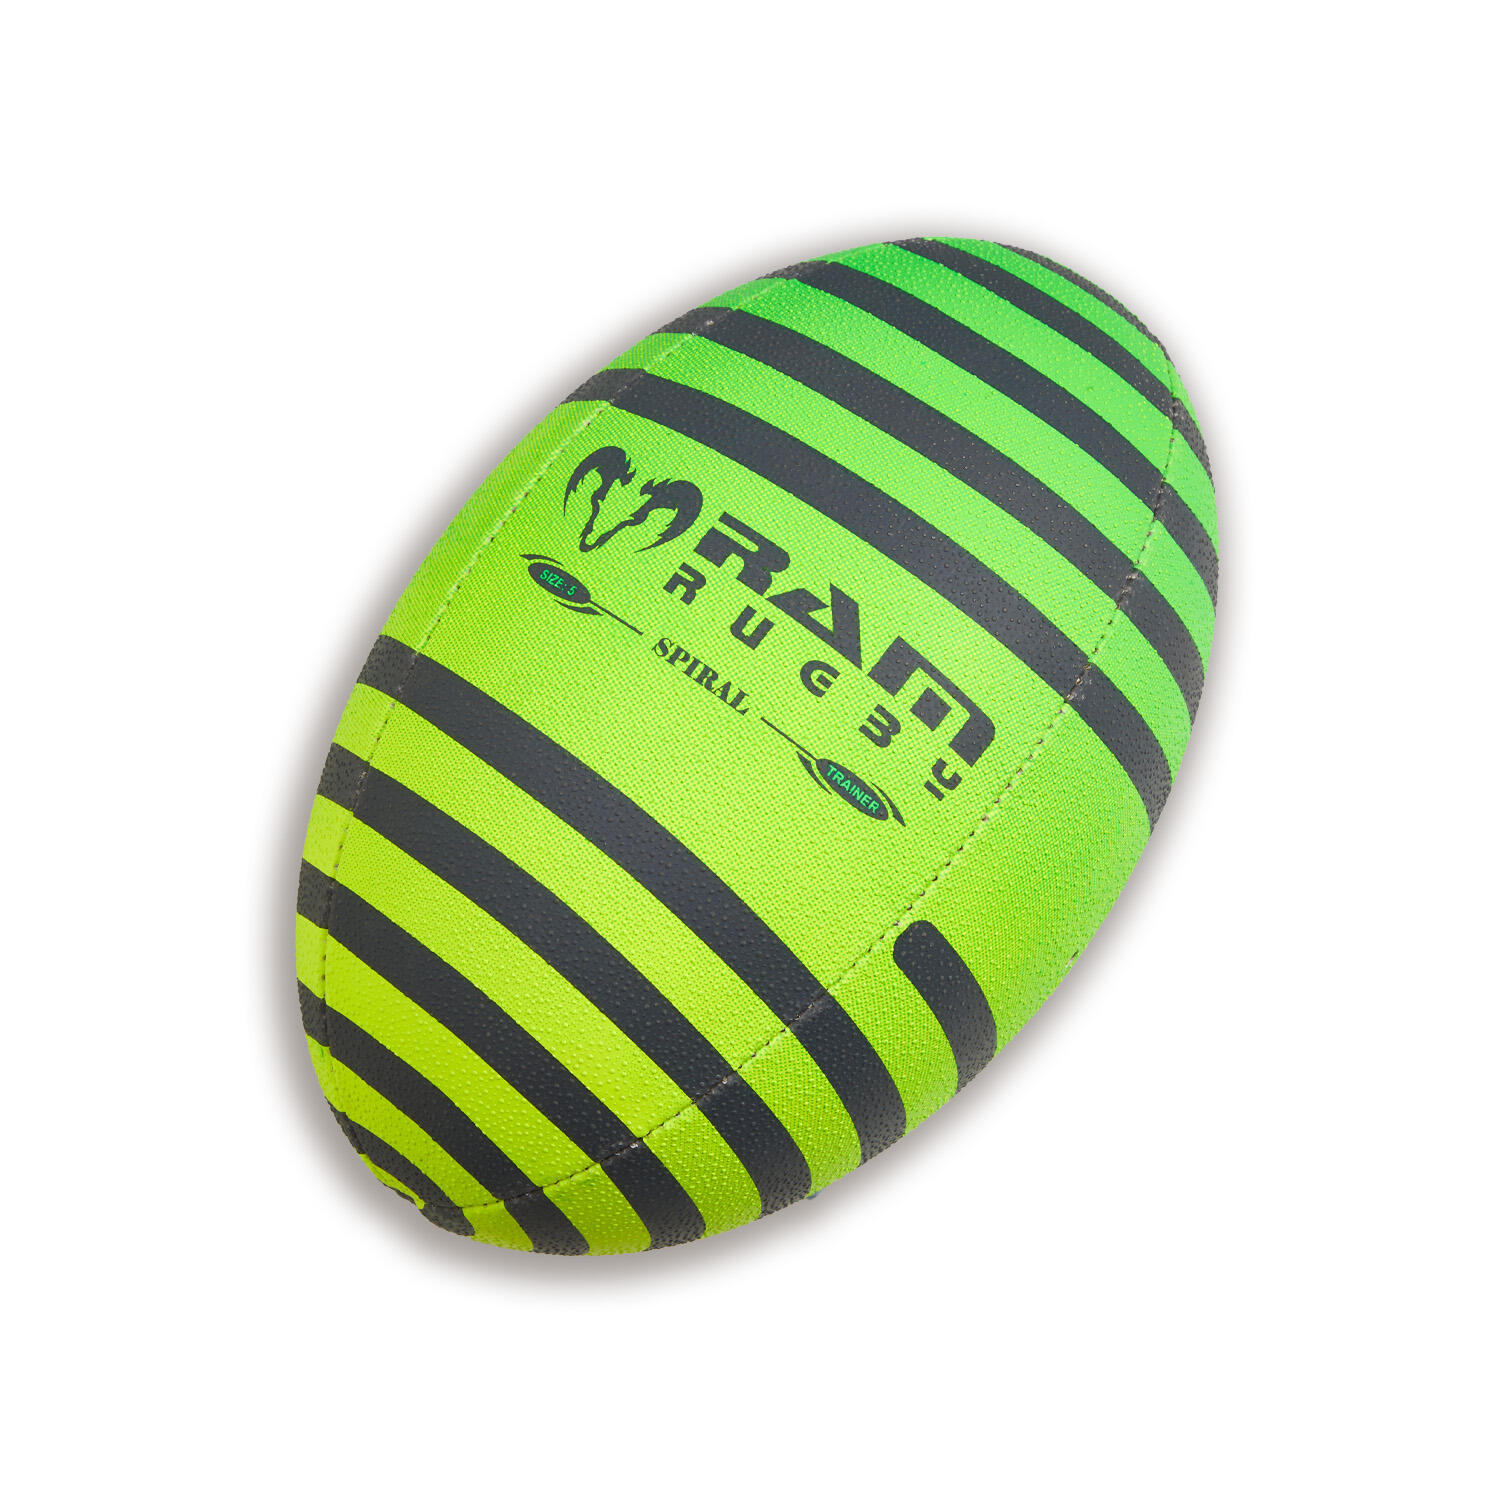 Ram Rugby Ball - Squad - Trainer - (Size 5) - Spiral 3/6